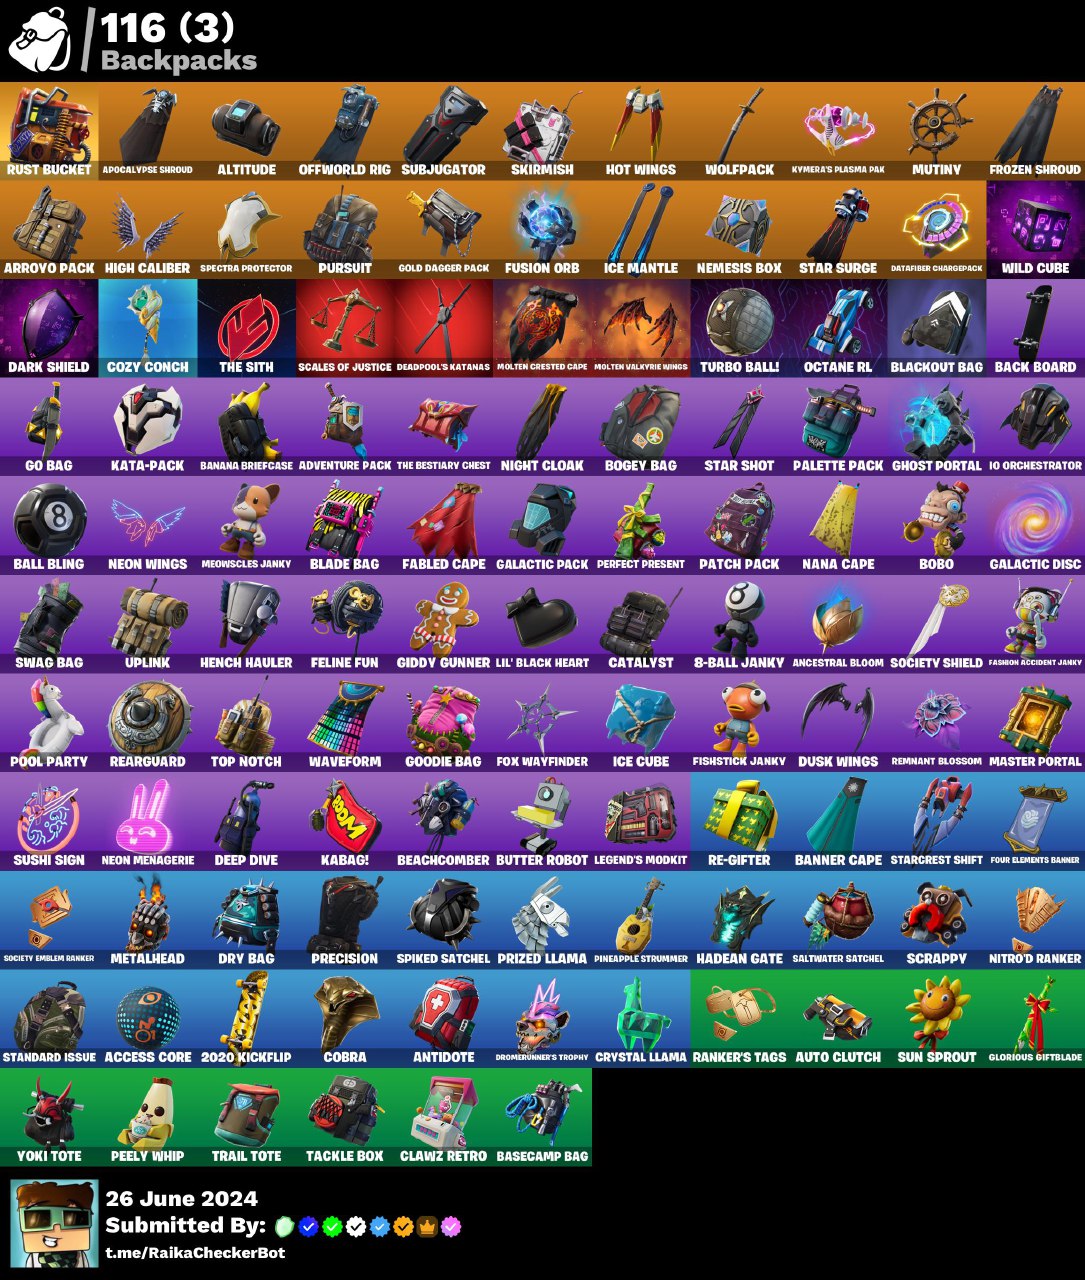 FA [PC/XBOX] 104 skins, GALAXY, MERRY MINT AXE, Gold Brutus, Gold Midas, Rogue Agent, Major Glory, Psycho Bandit